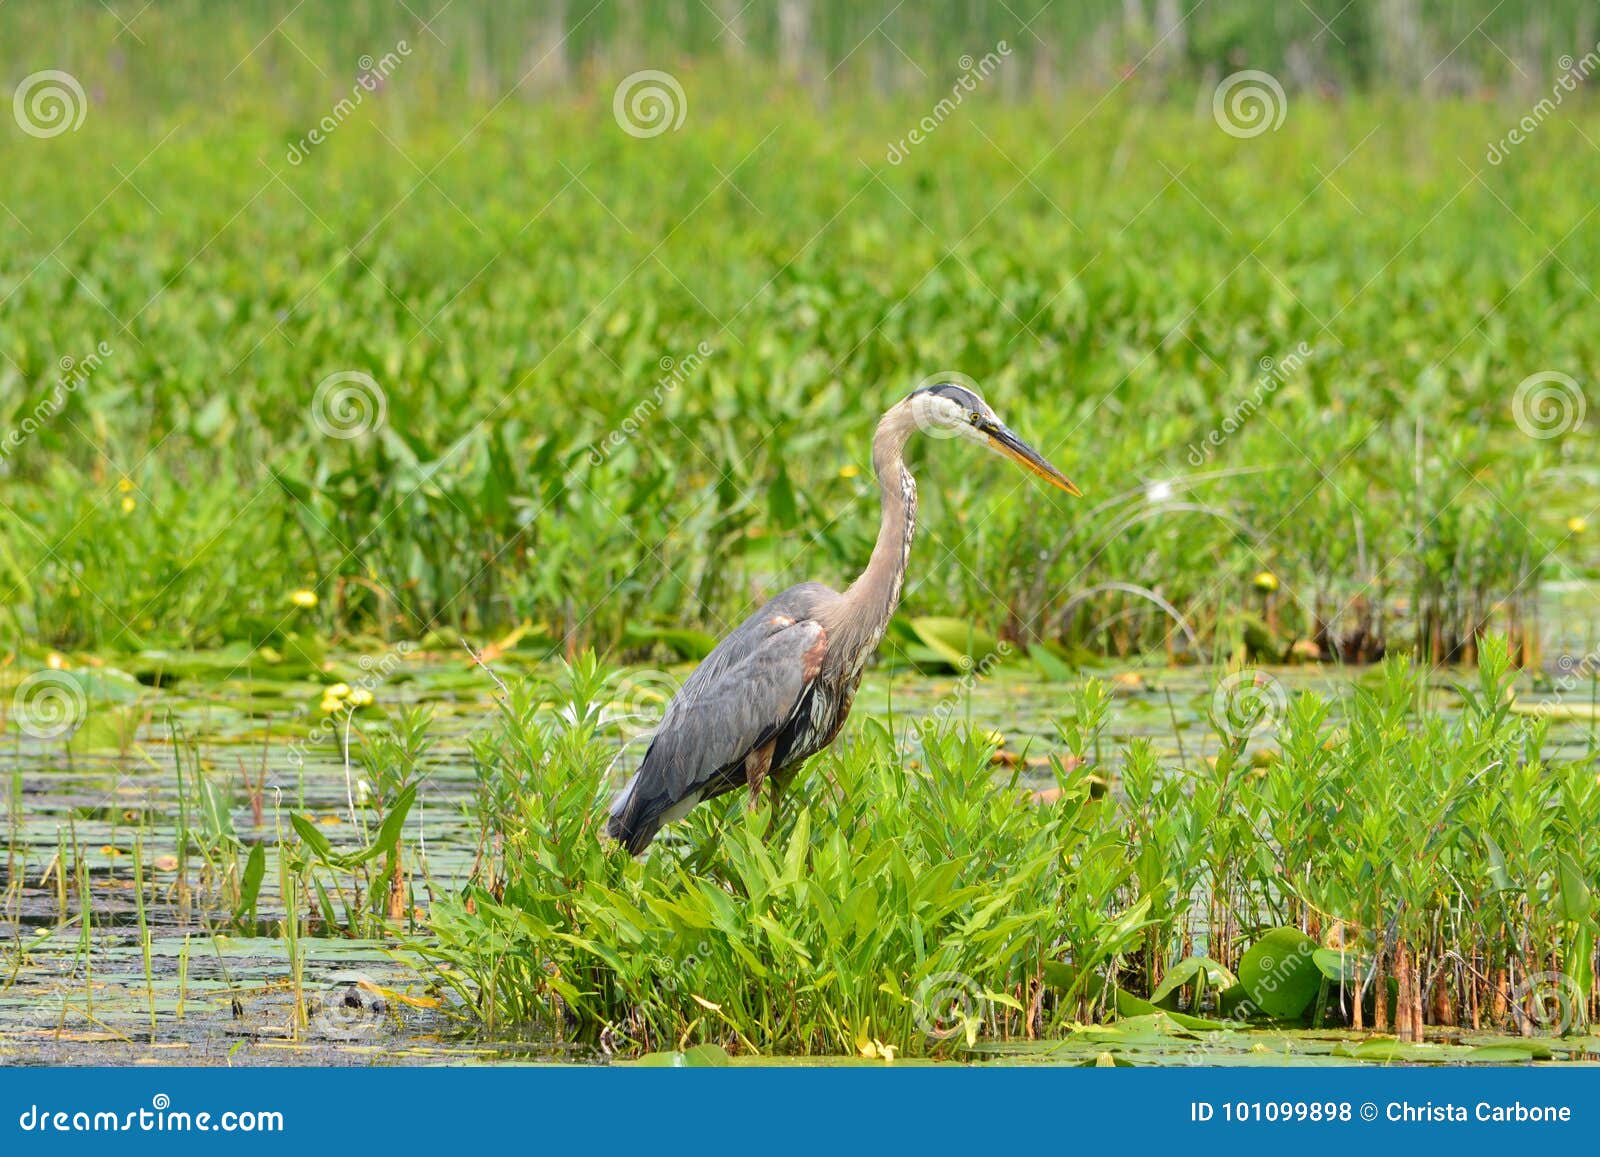 Great Blue Heron Standing in Water and Vegetation Stock Photo - Image ...